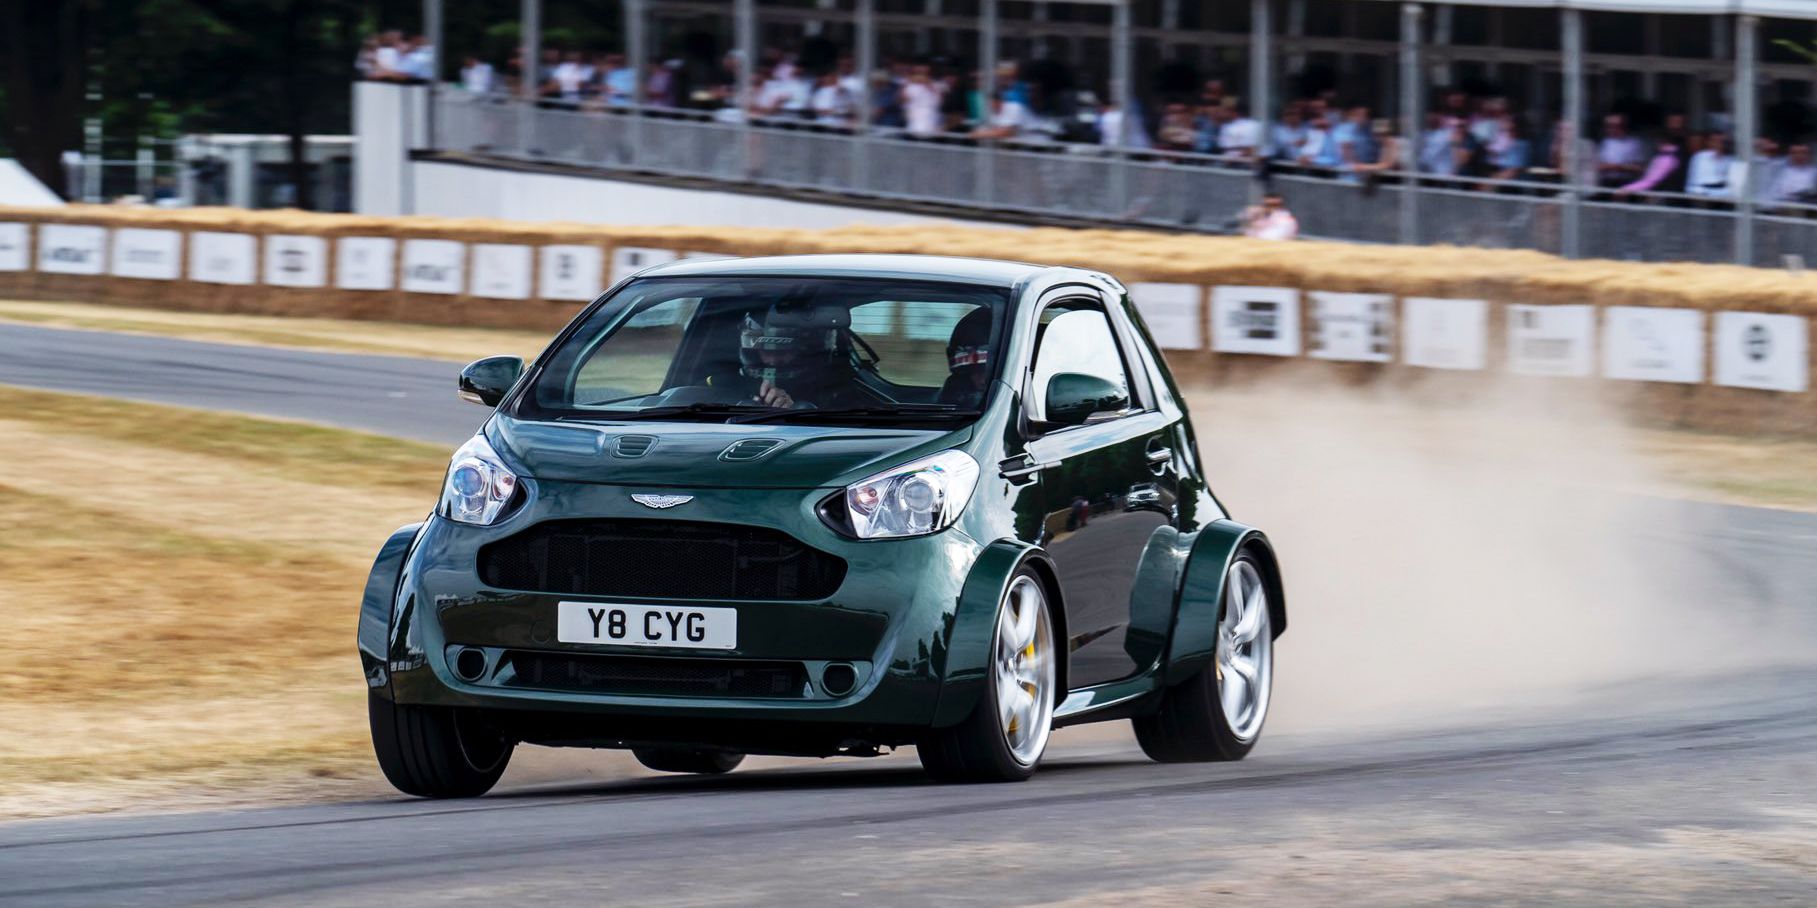 The Aston Martin Cygnet V8 Drives As Silly As It Looks